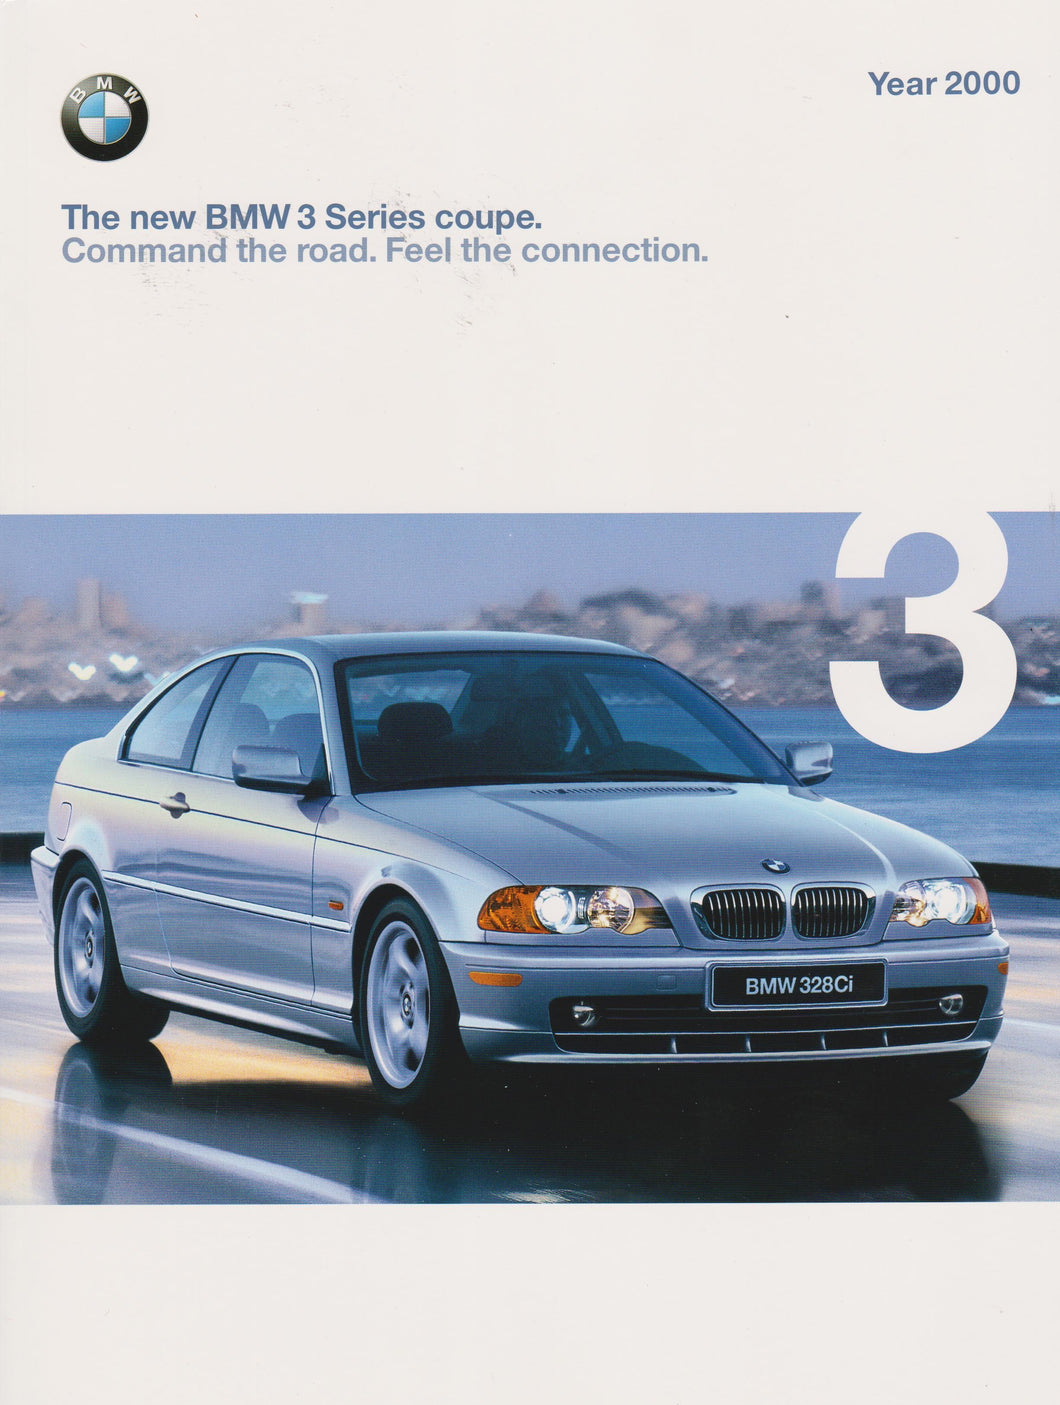 Brochure - The new BMW 3 Series Coupe. Command the road. Feel the connection. Year 2000